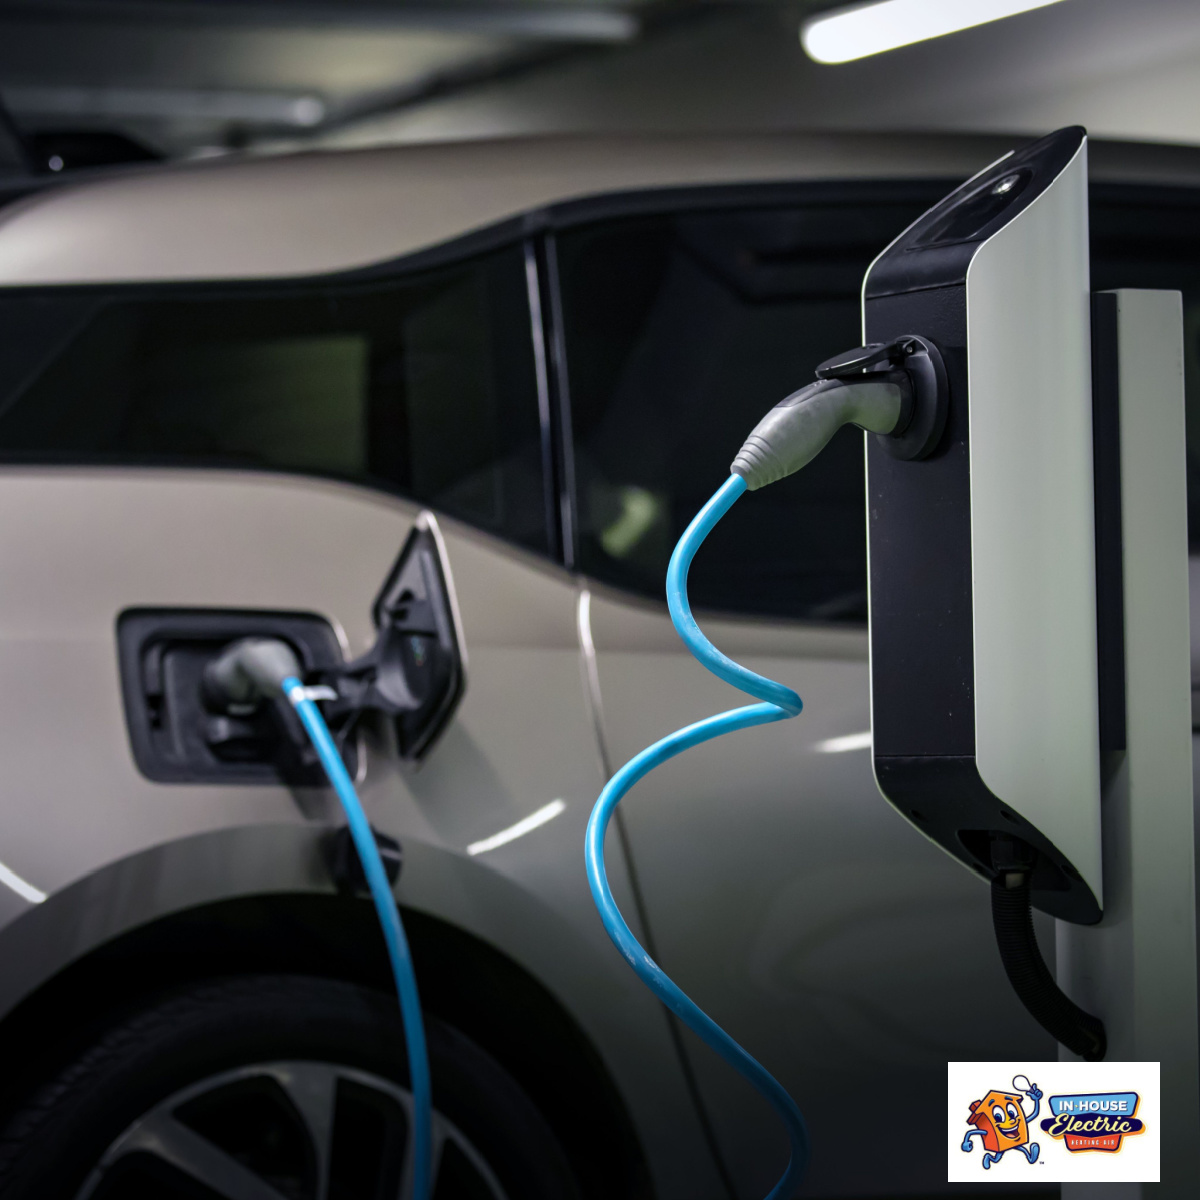 Car Charging Station Installation in North Bend by In-House Electric